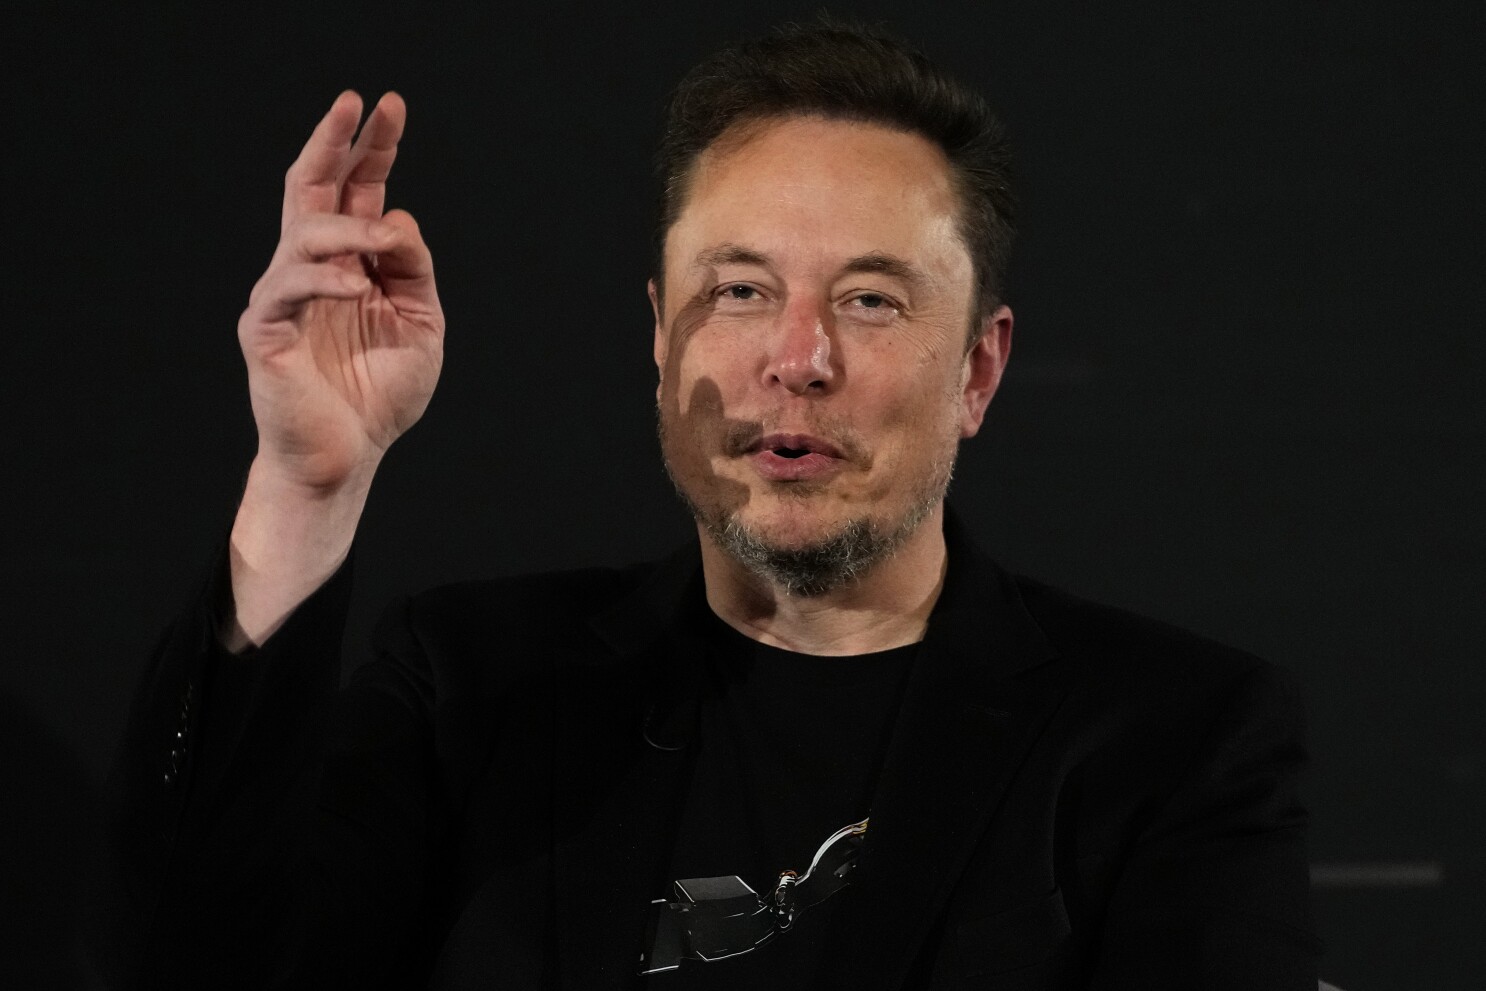 Elon Musk agrees with tweet accusing Jewish people of 'hatred